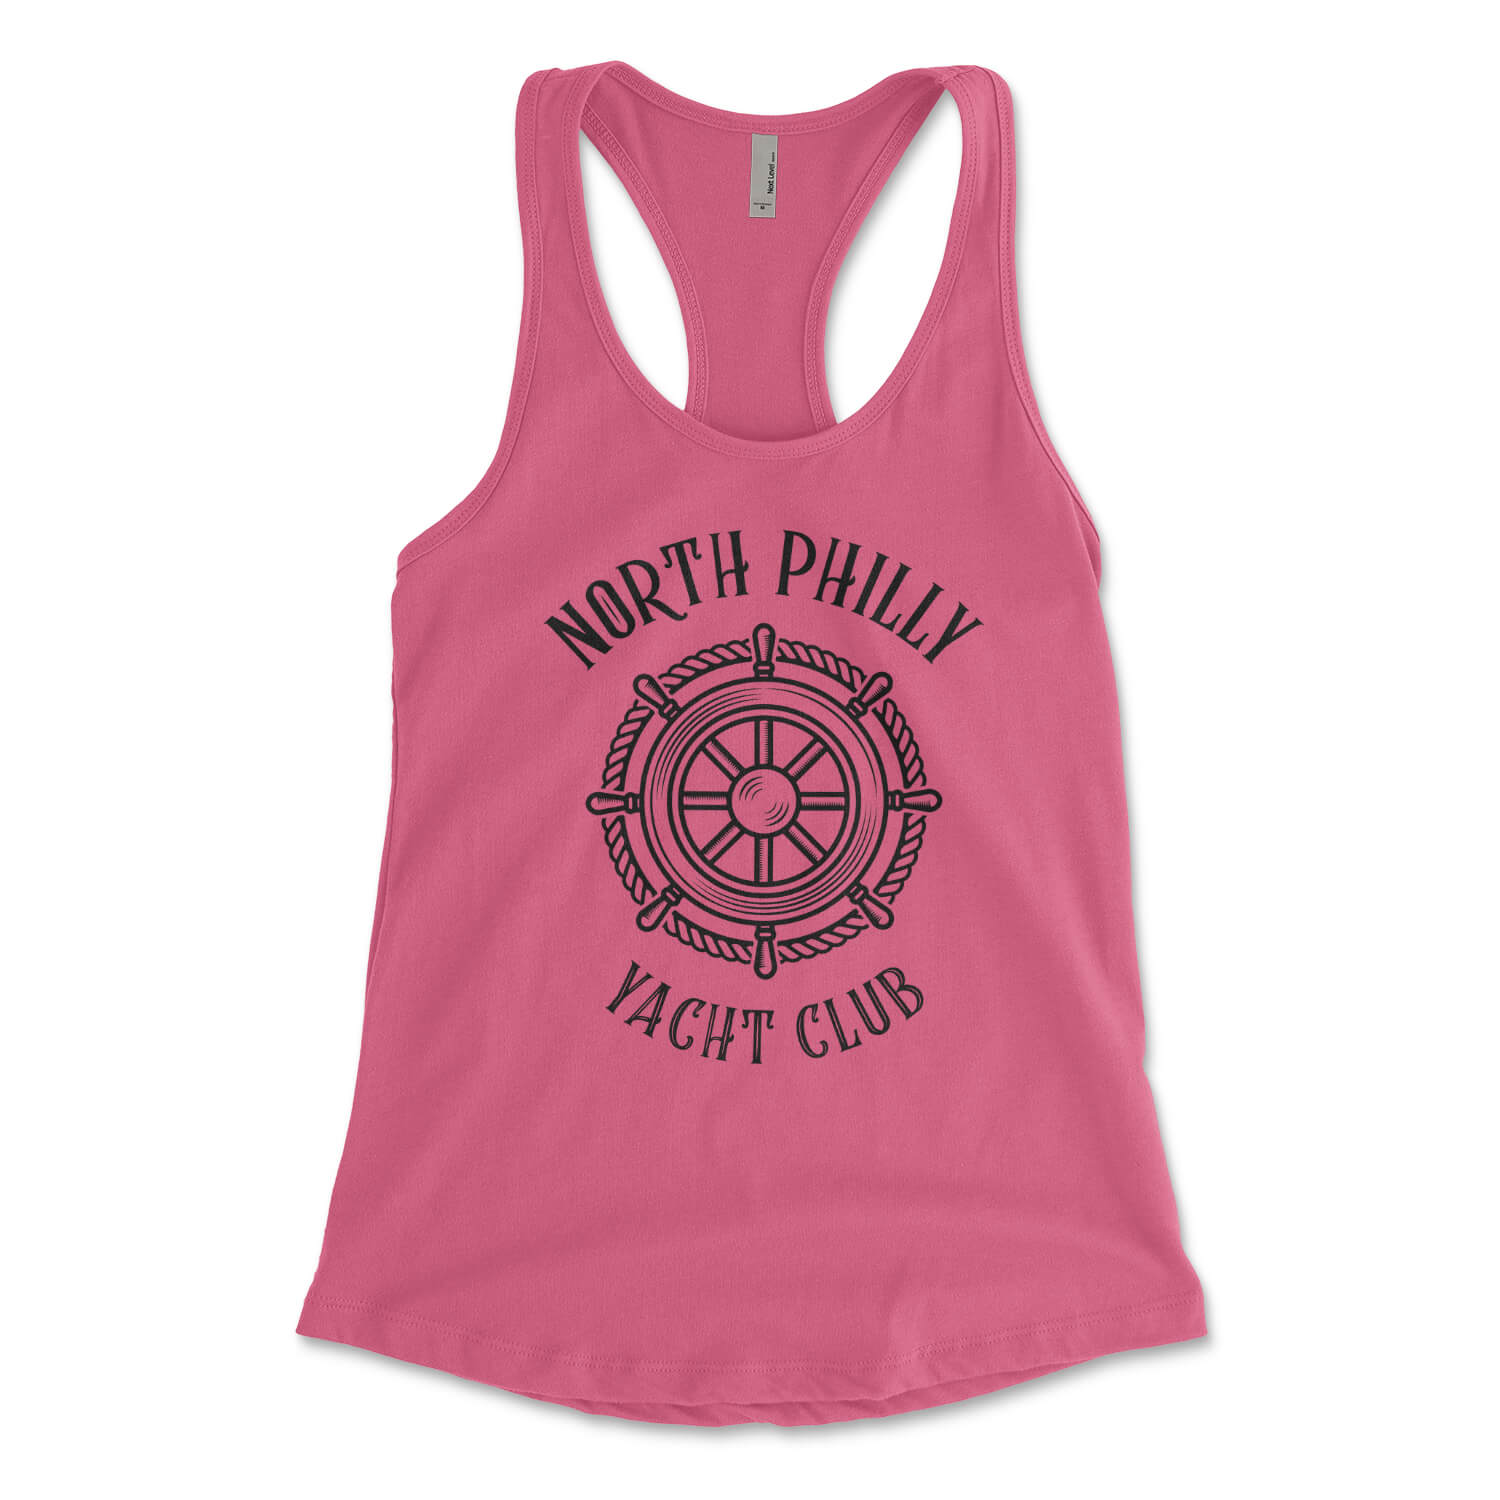 North Philly Yacht Club hot pink womens racerback tank top from Phillygoat